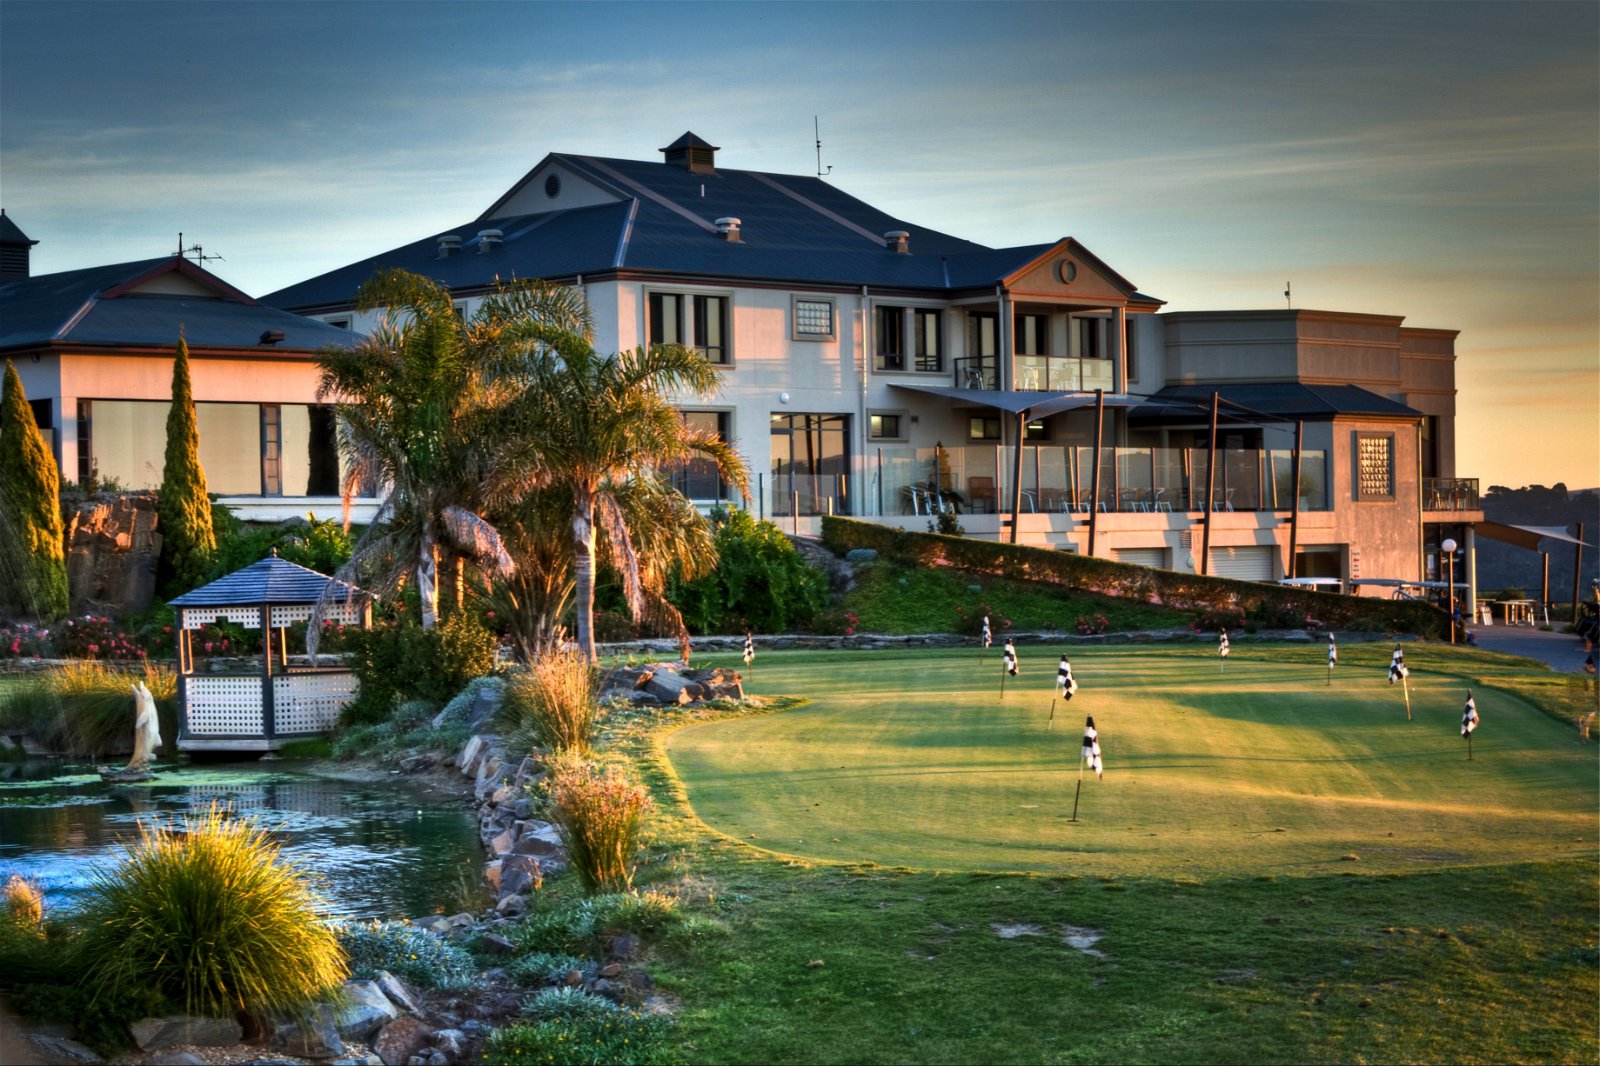 Baudins Restaurant at McCracken Country Club - Great Ocean Road Tourism